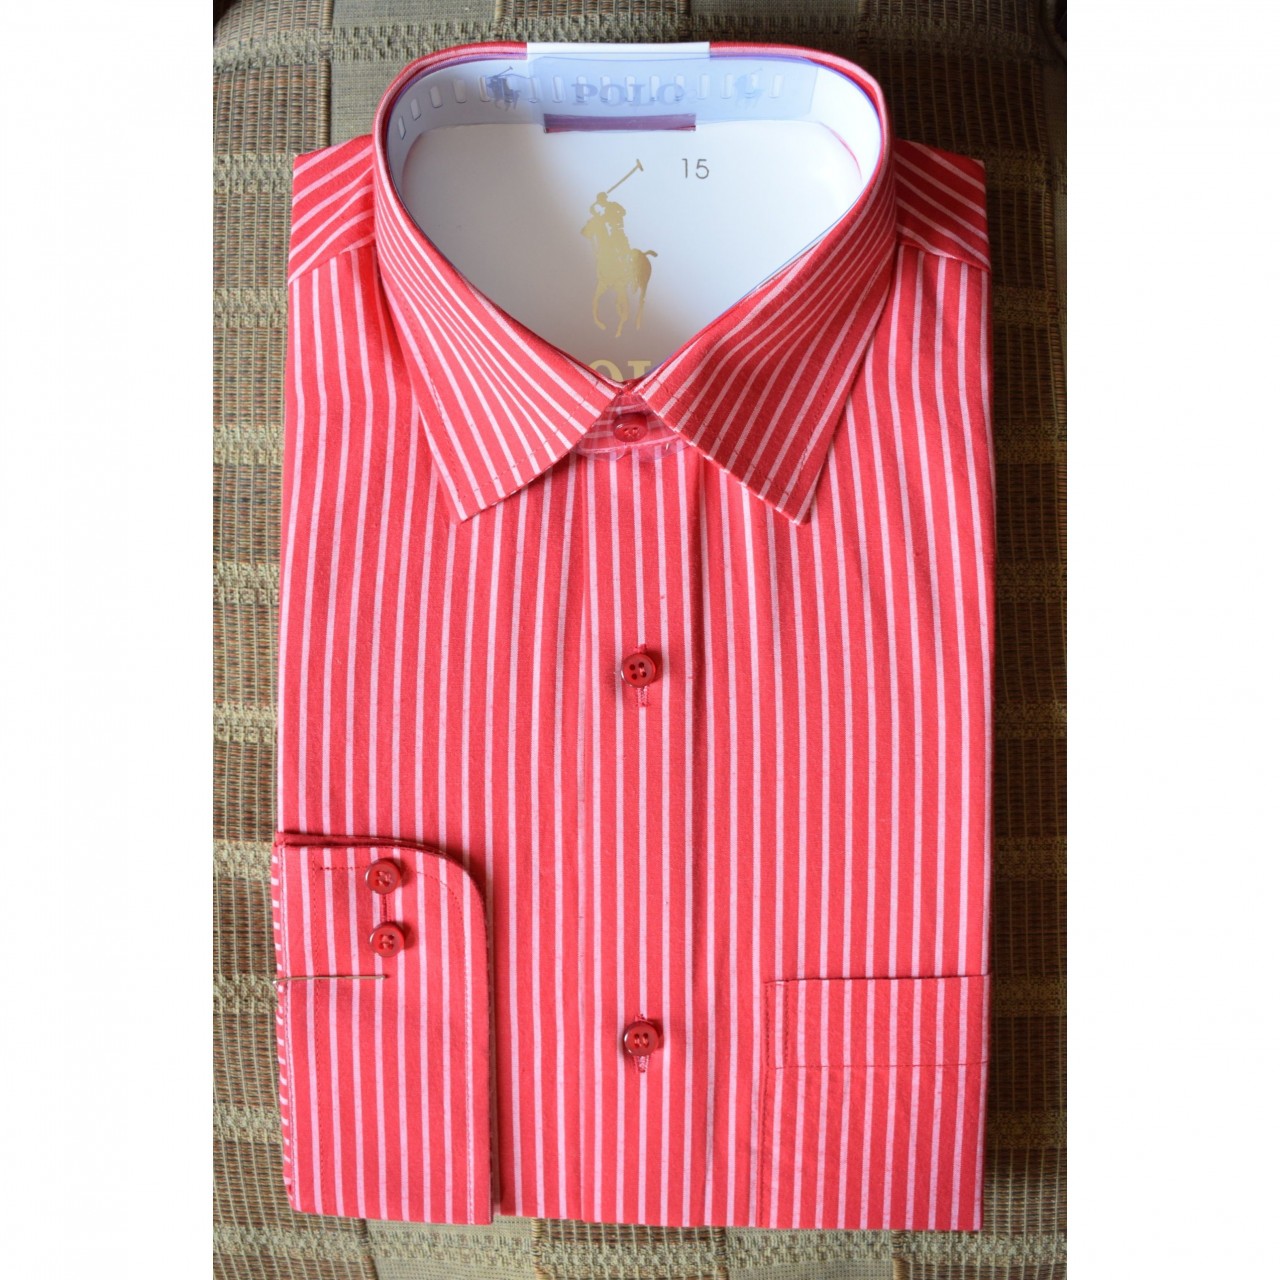 Stripes Formal Shirt Top Quality Stitching For Men - Red White